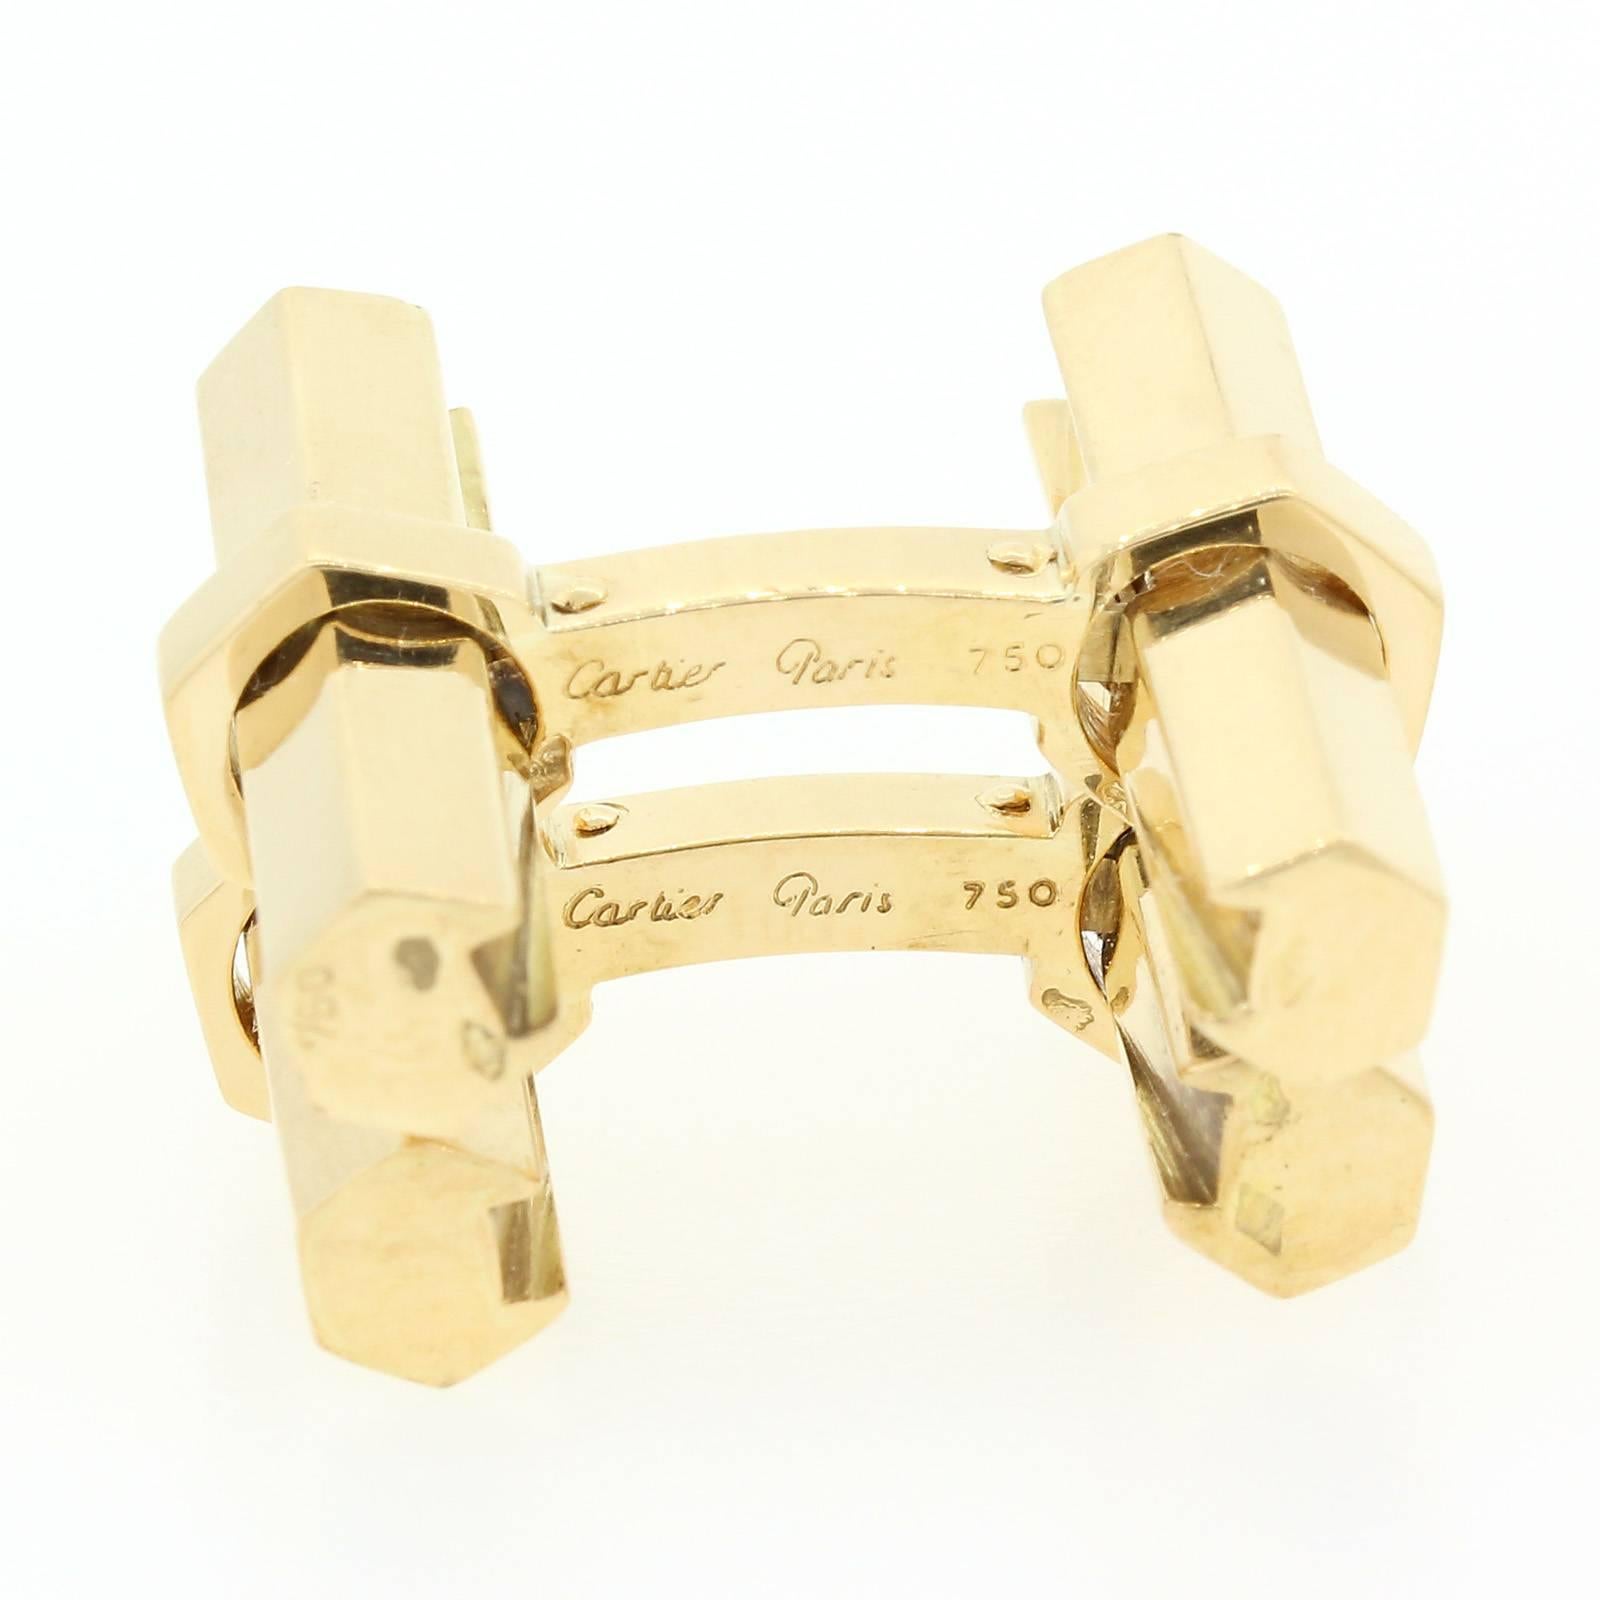 Cartier France Cufflinks of tubular design with removable hexagonal bars.  Each cufflink is signed "Cartier Paris 750" with French head and French maker hallmarks.  Circa 1970s.